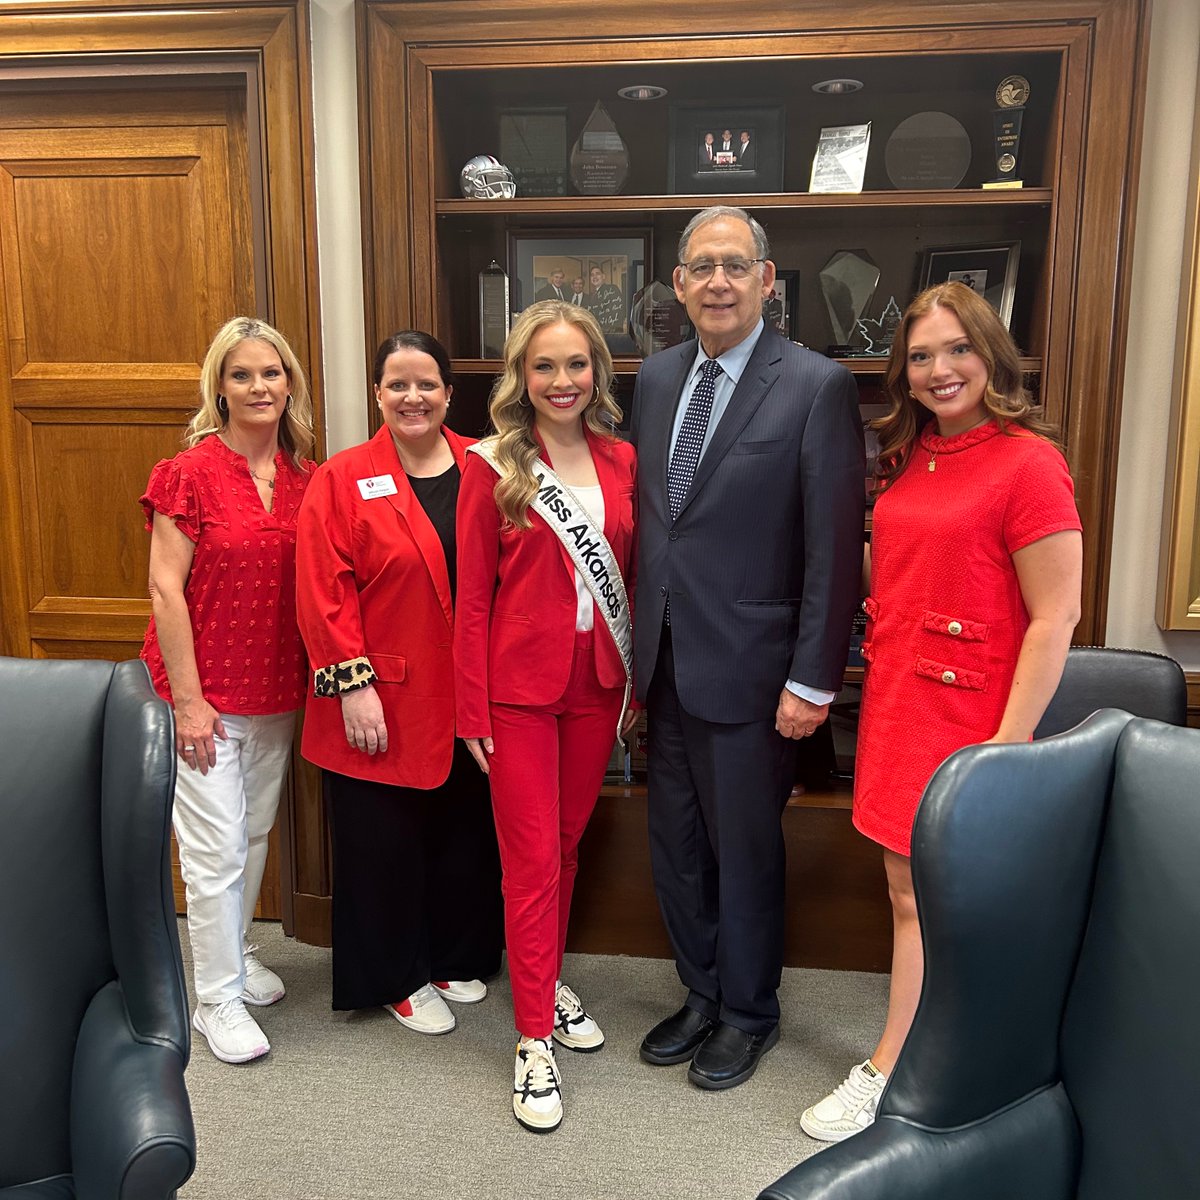 I was pleased to sit down with Miss Arkansas Cori Keller and other Natural State members of @American_Heart. I appreciate their advocacy for heart health awareness and policies. #ARinDC #HeartsontheHill